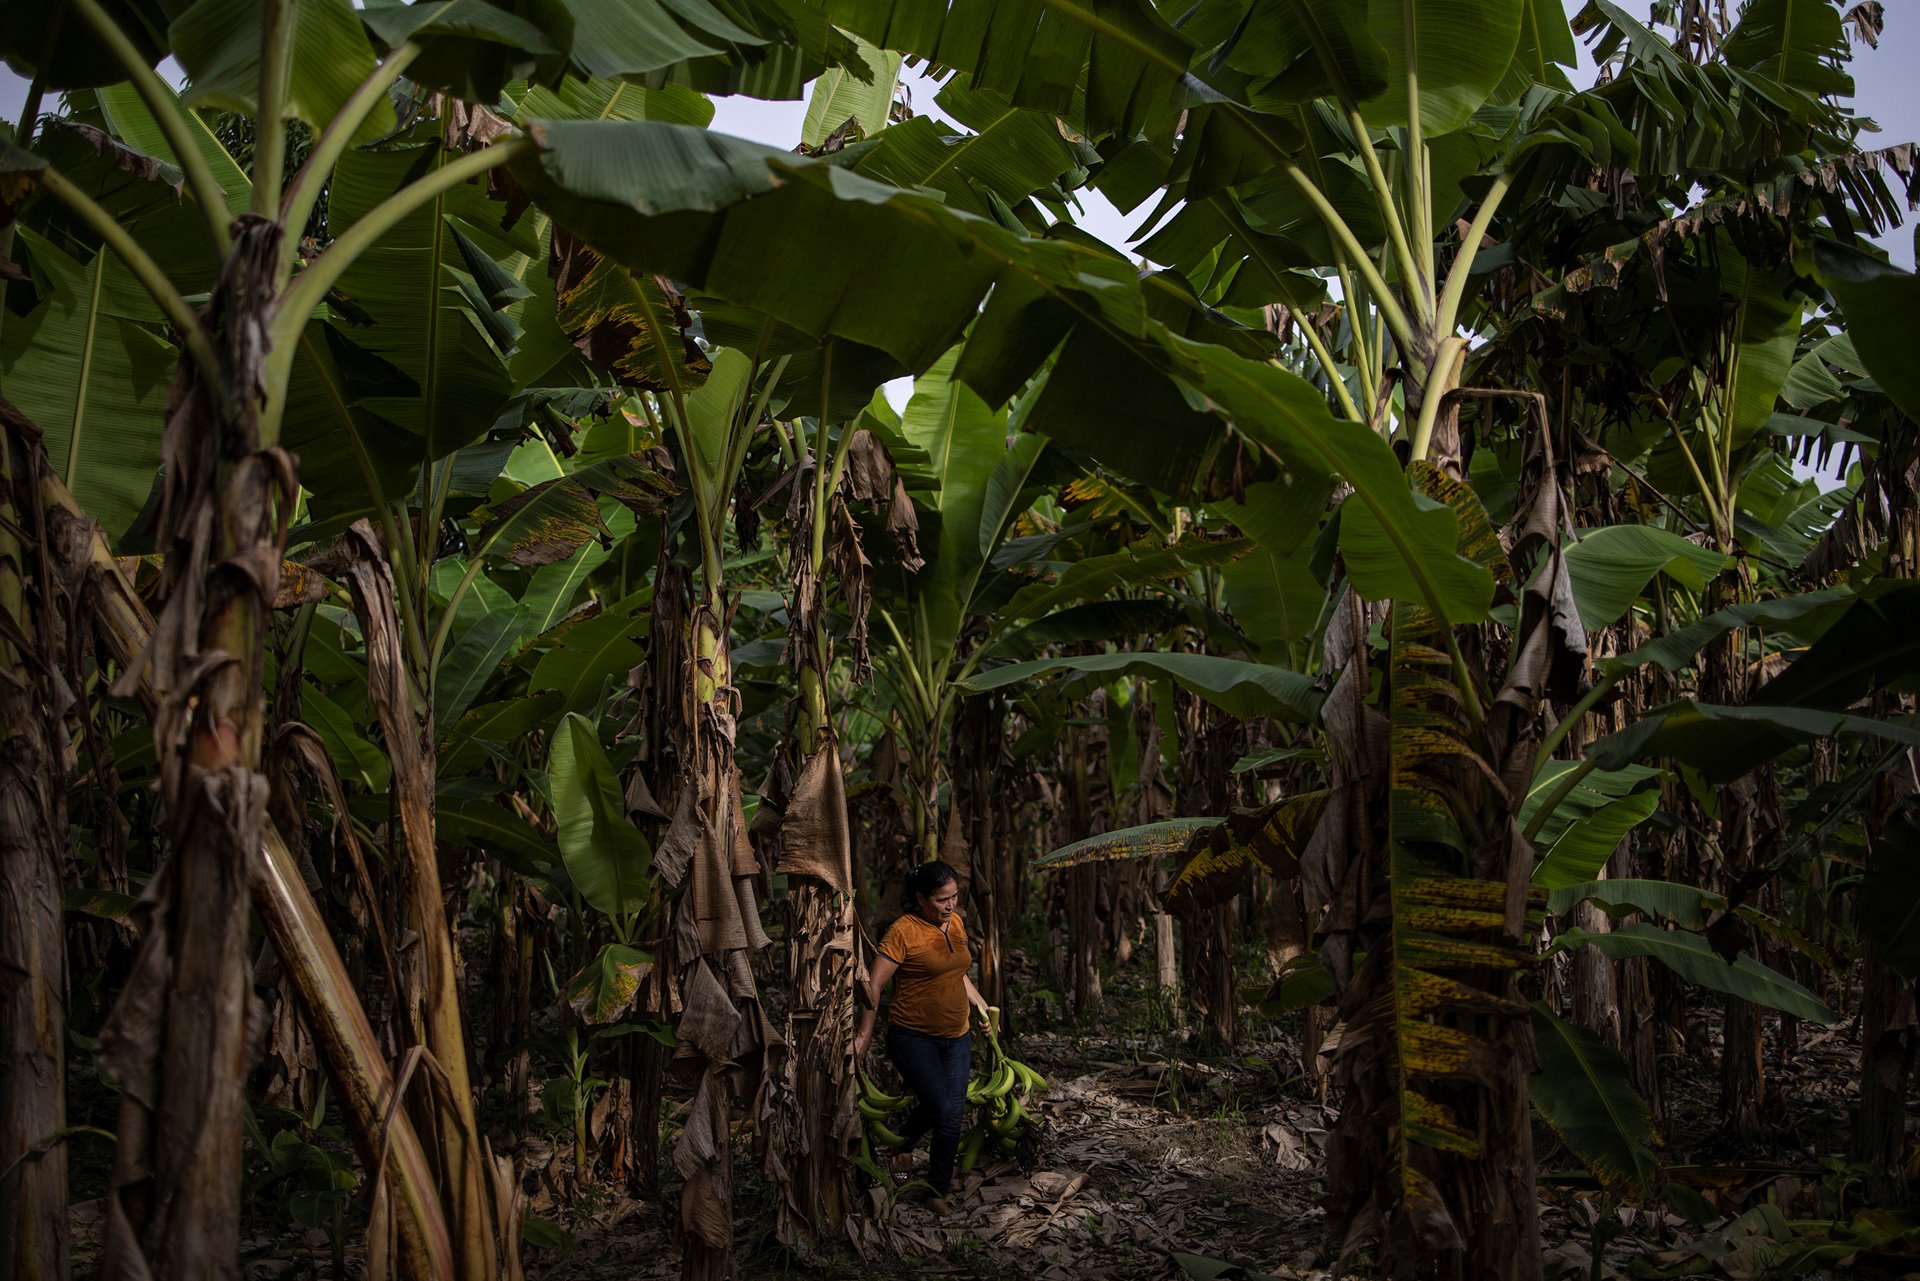 <p>Maria Hernandez arrives to work on a banana plantation, in San Pedro Sula, Honduras, while awaiting a decision on her immigration case, in order to travel to the United States to reunite with her daughters.</p>
